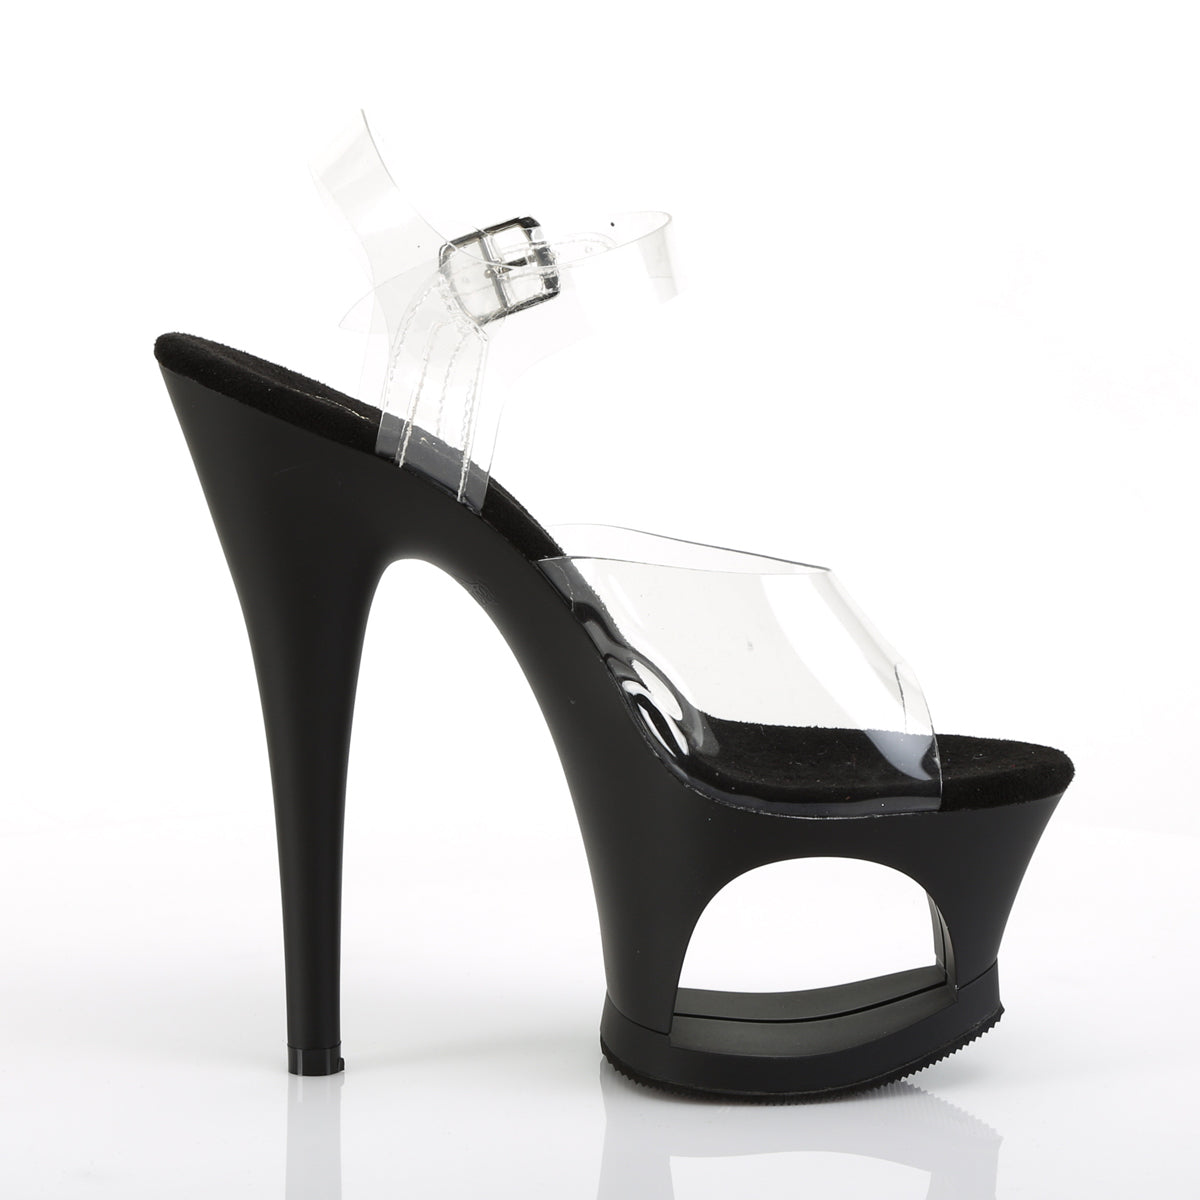 MOON-708 7" Heel Clear and Black Pole Dancing Platforms-Pleaser- Sexy Shoes Fetish Heels